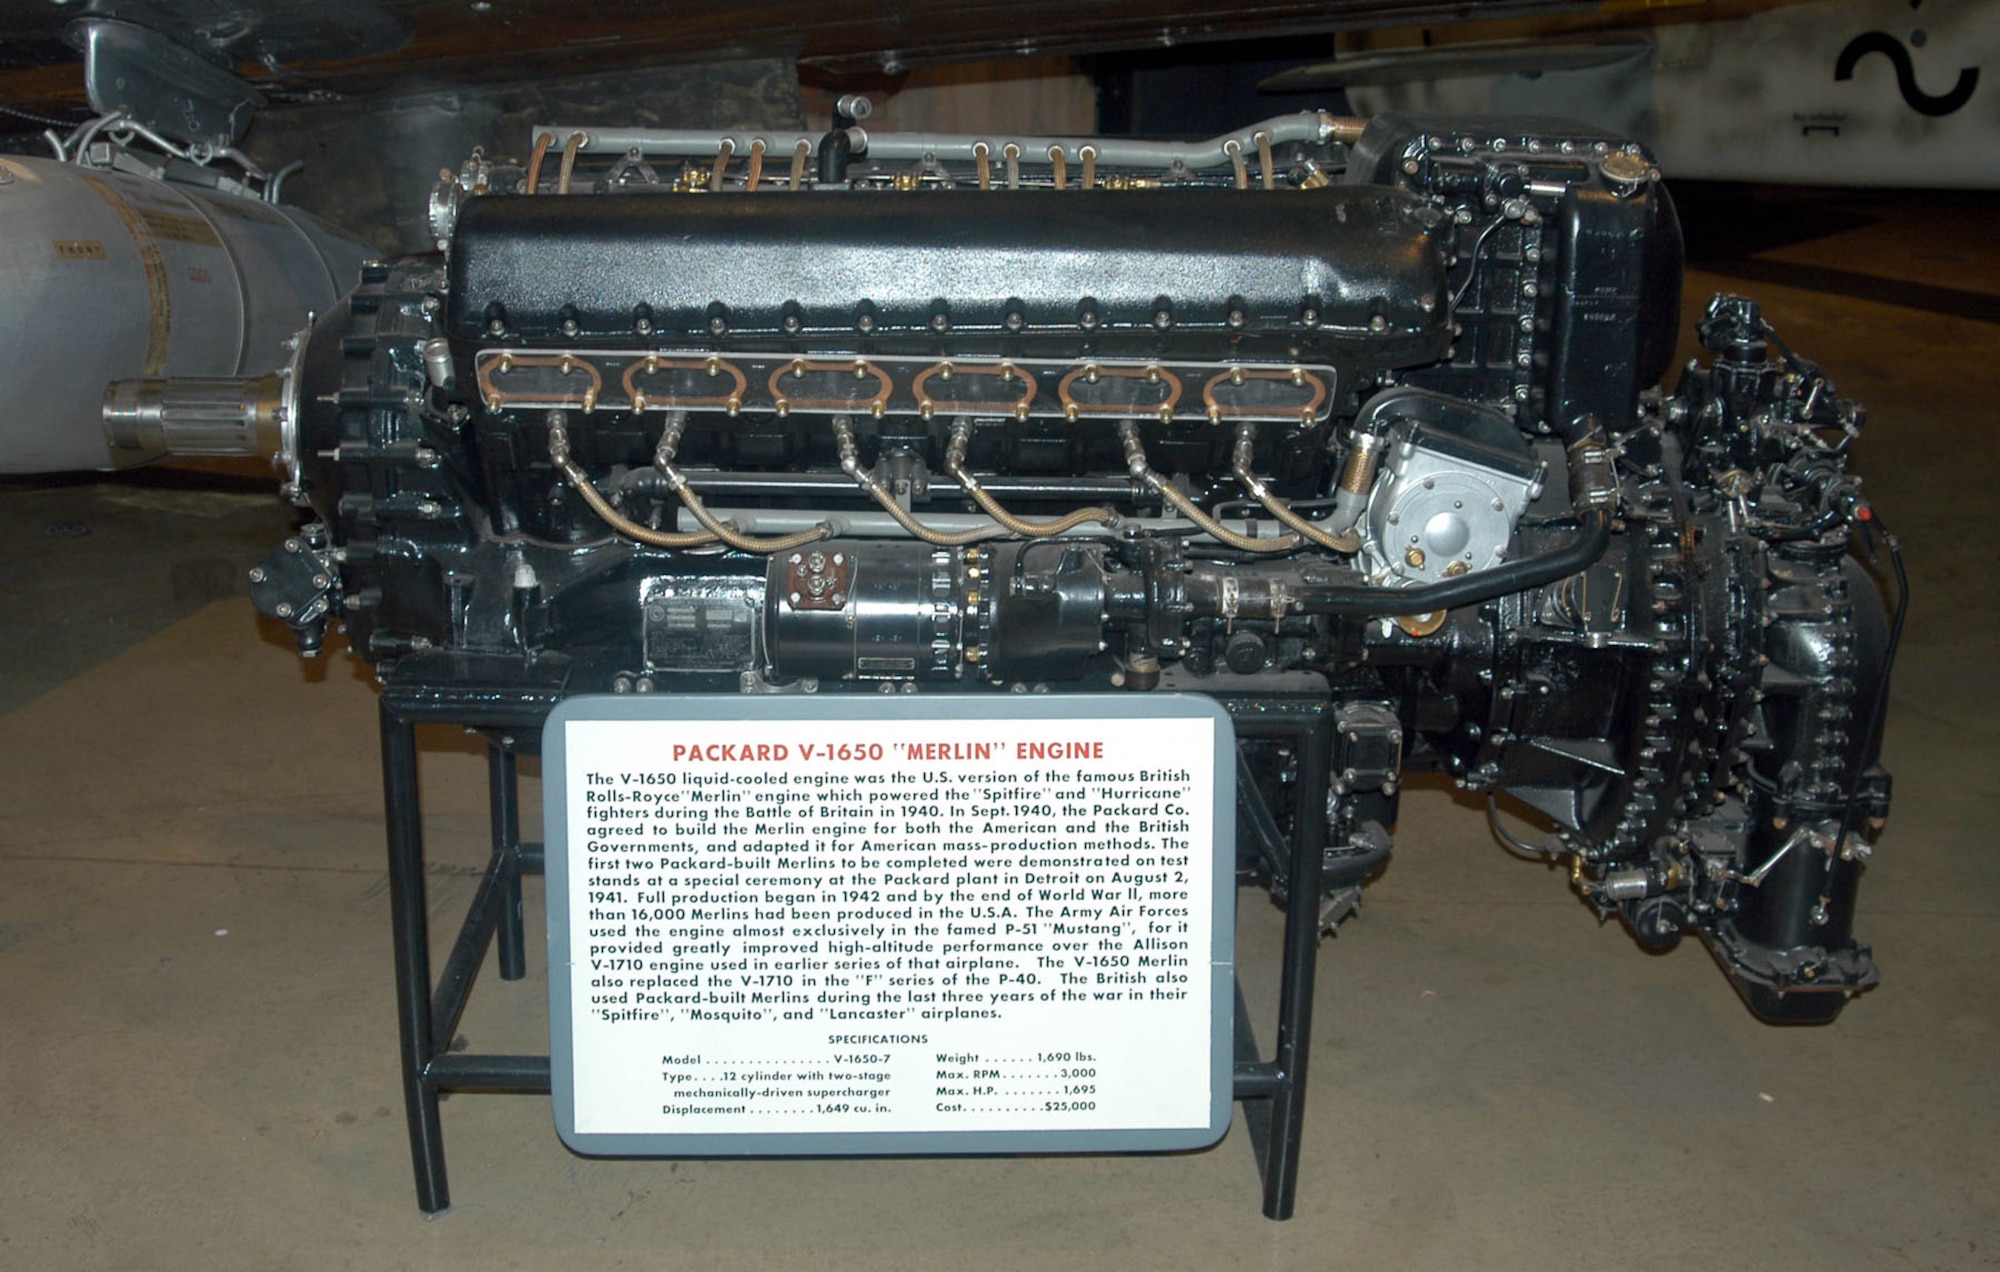 DAYTON, Ohio -- Packard V-1650 Merlin engine on display in the World War II Gallery at the National Museum of the United States Air Force. (U.S. Air Force photo)